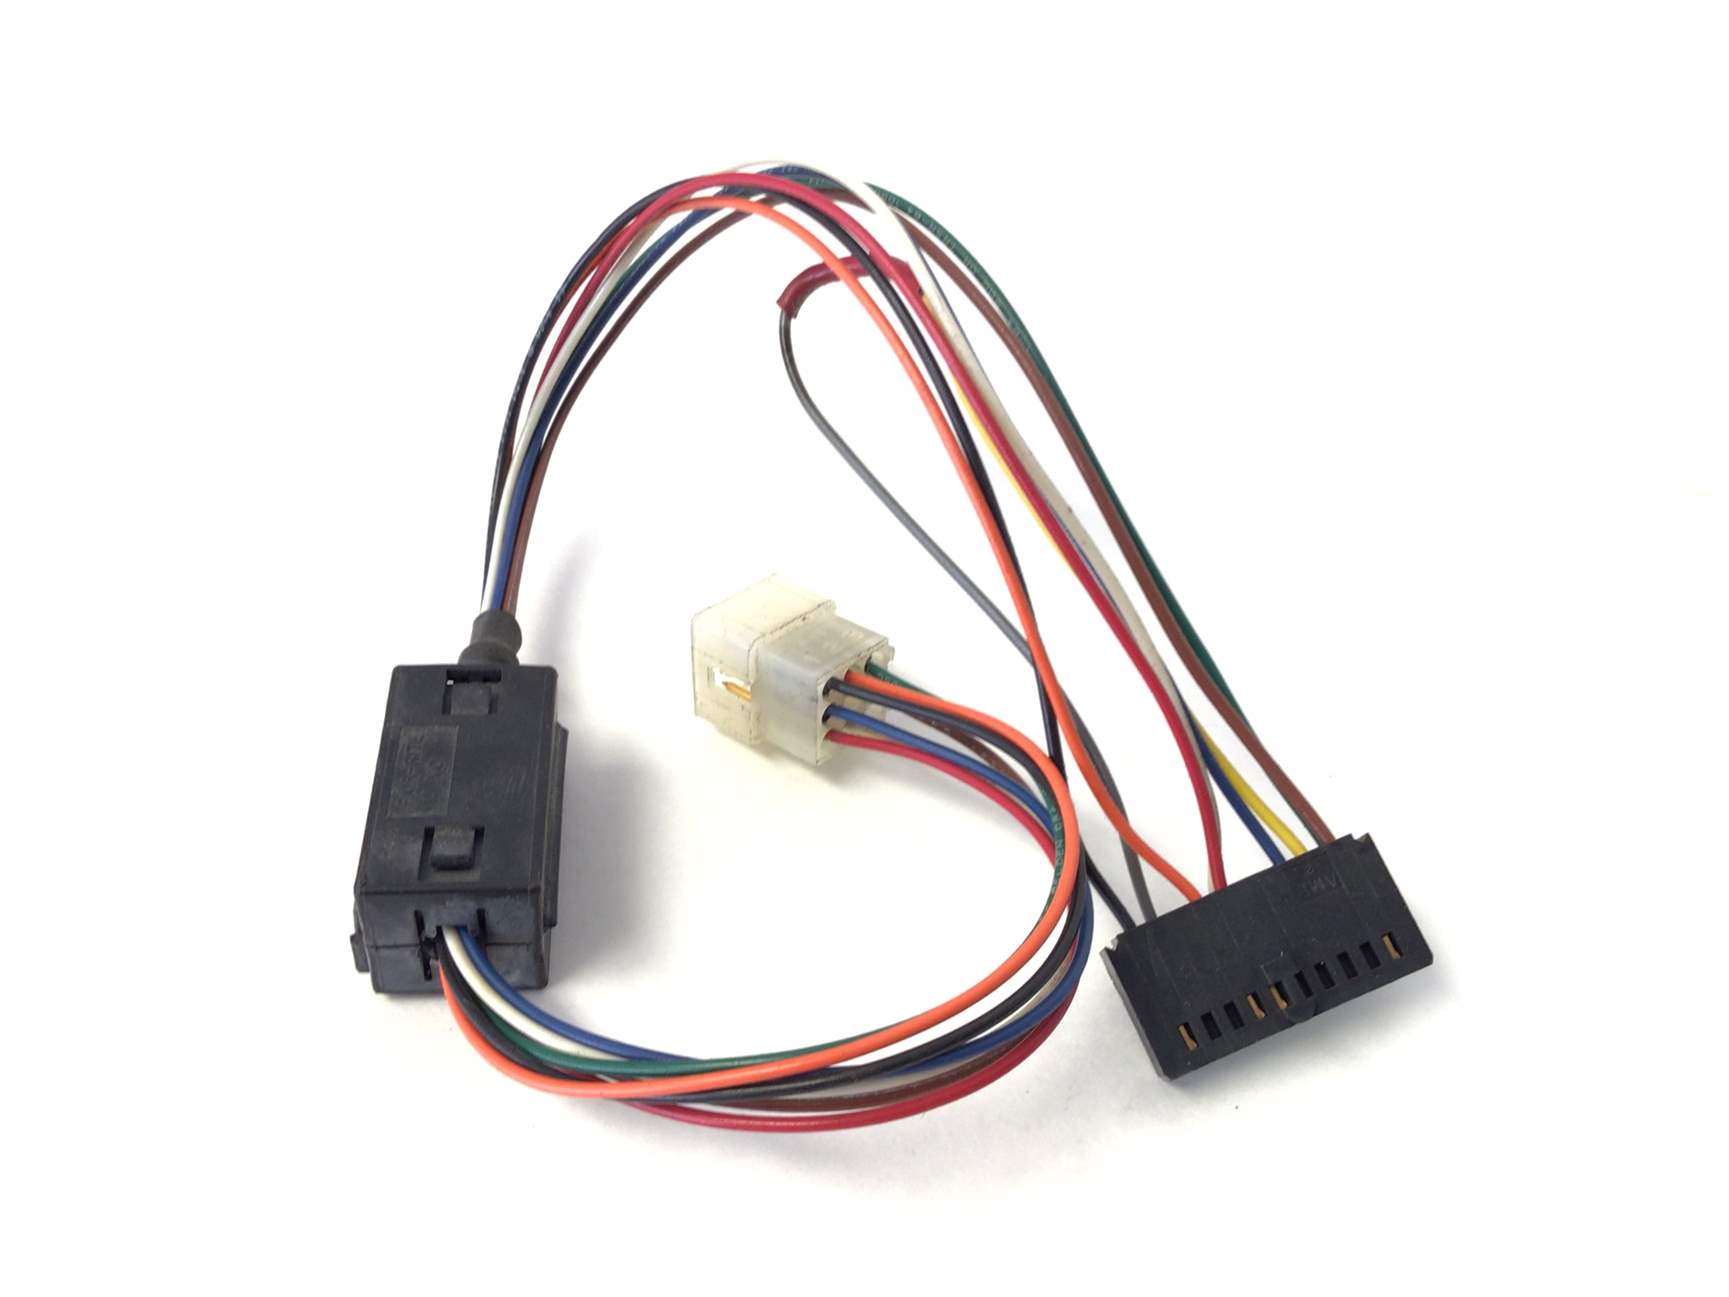 Display Upgrade Kit Wire Harness CL (Used)